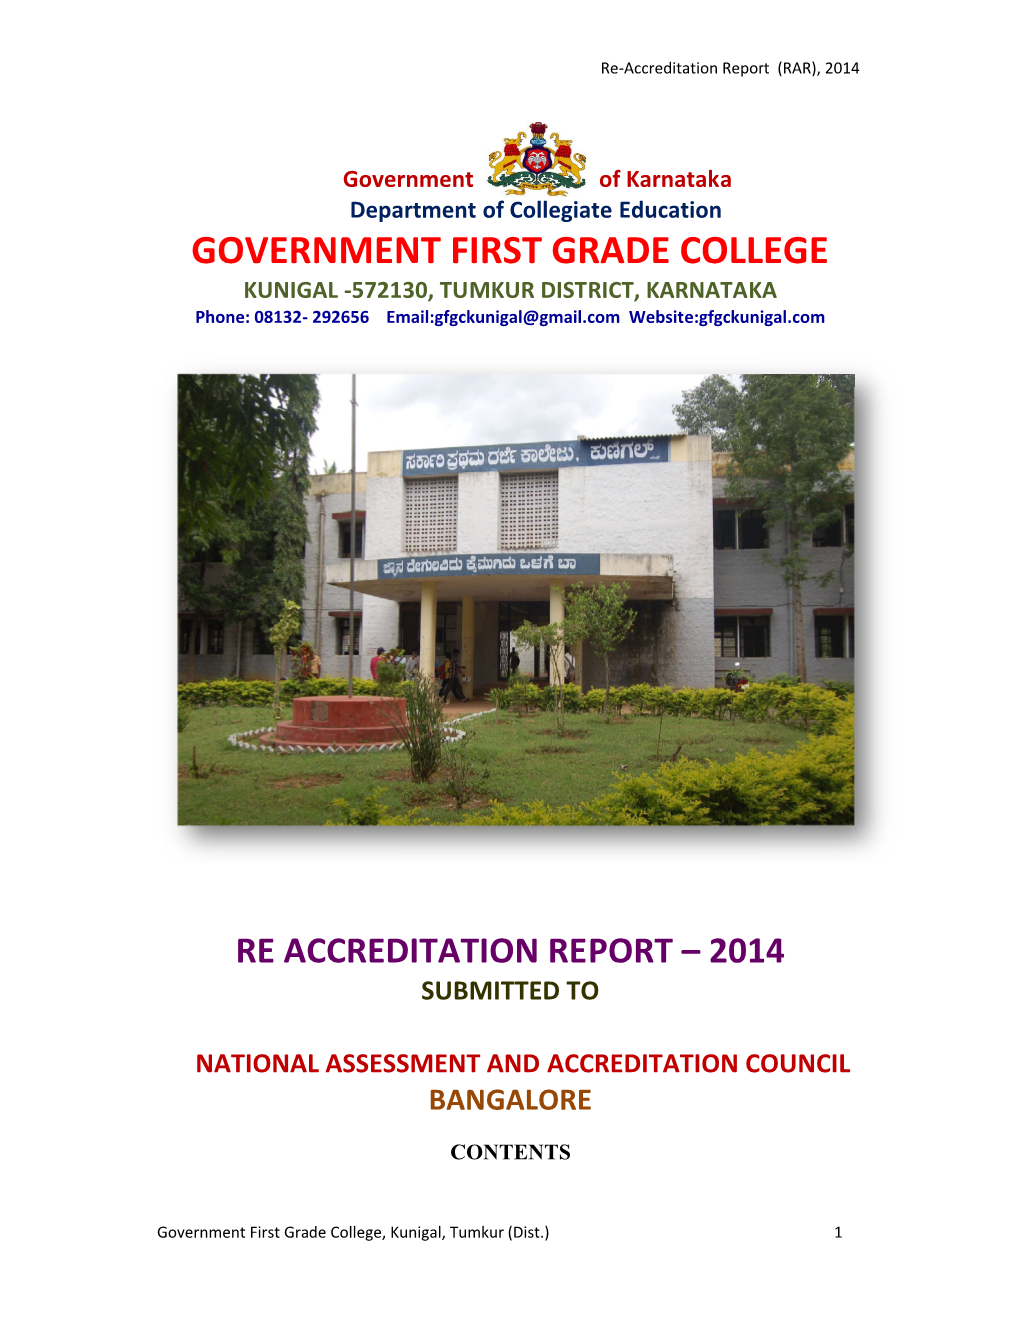 Government First Gra Overnment First Grade College Rade College